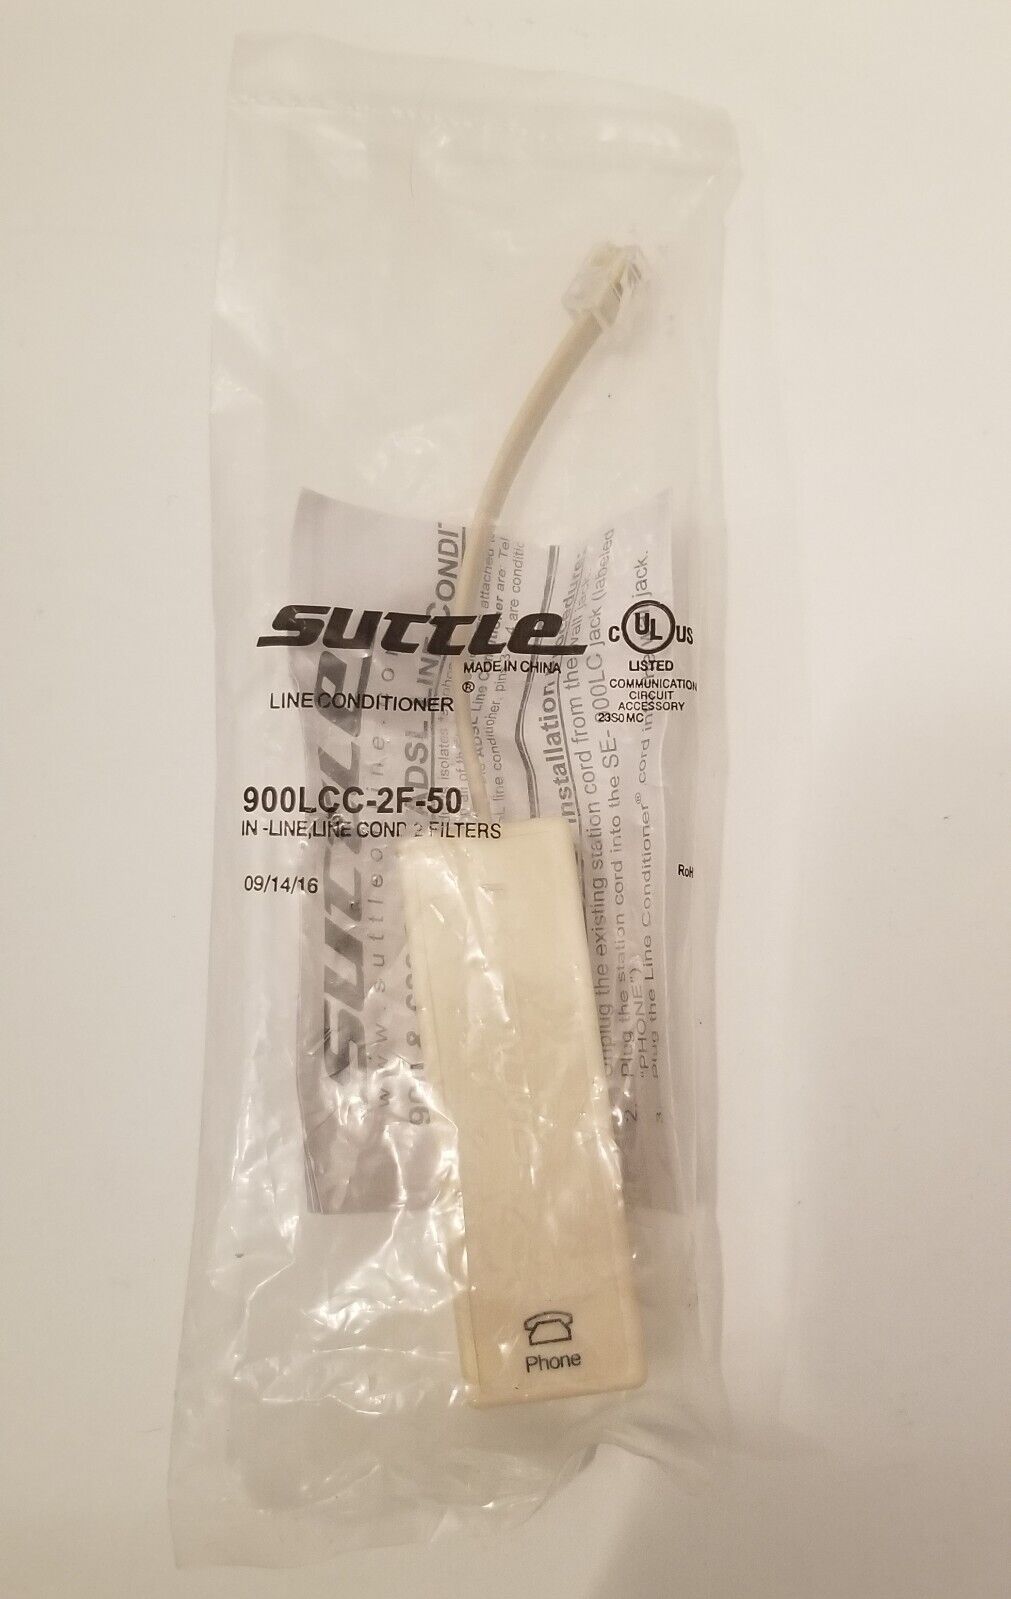 Suttle 900LCC-2F-50 In Line Conditioner